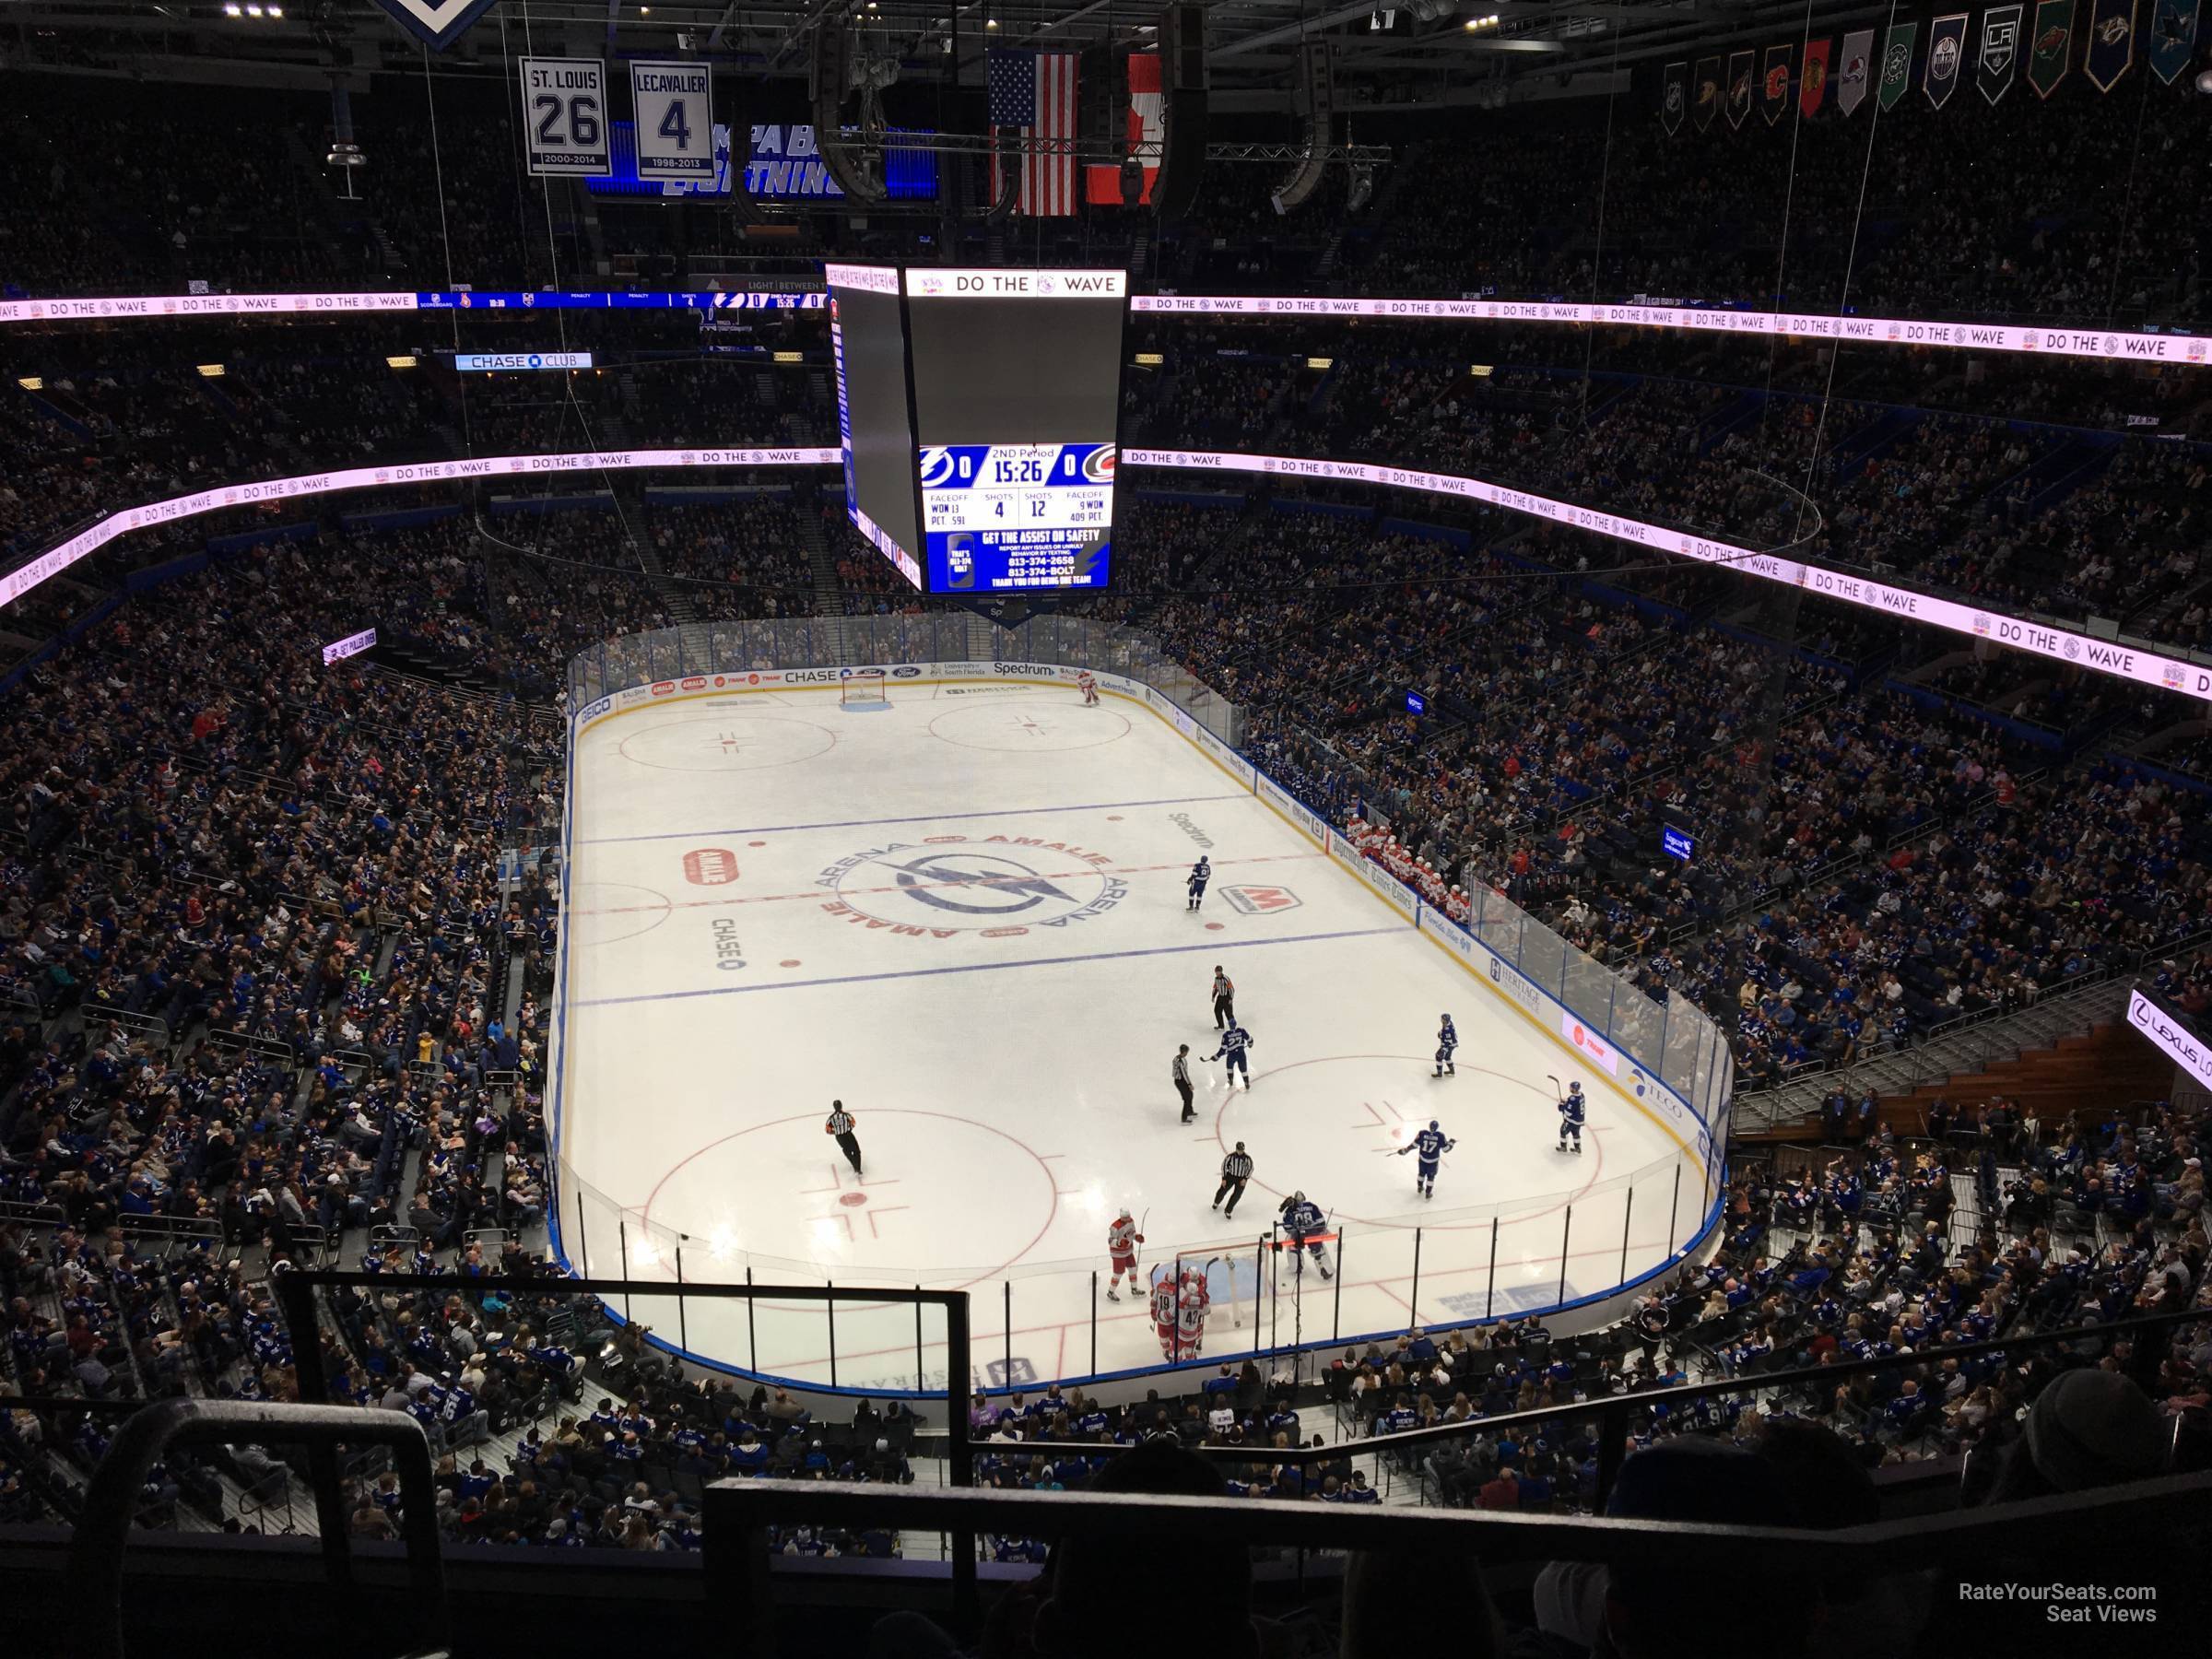 section 309, row c seat view  for hockey - amalie arena